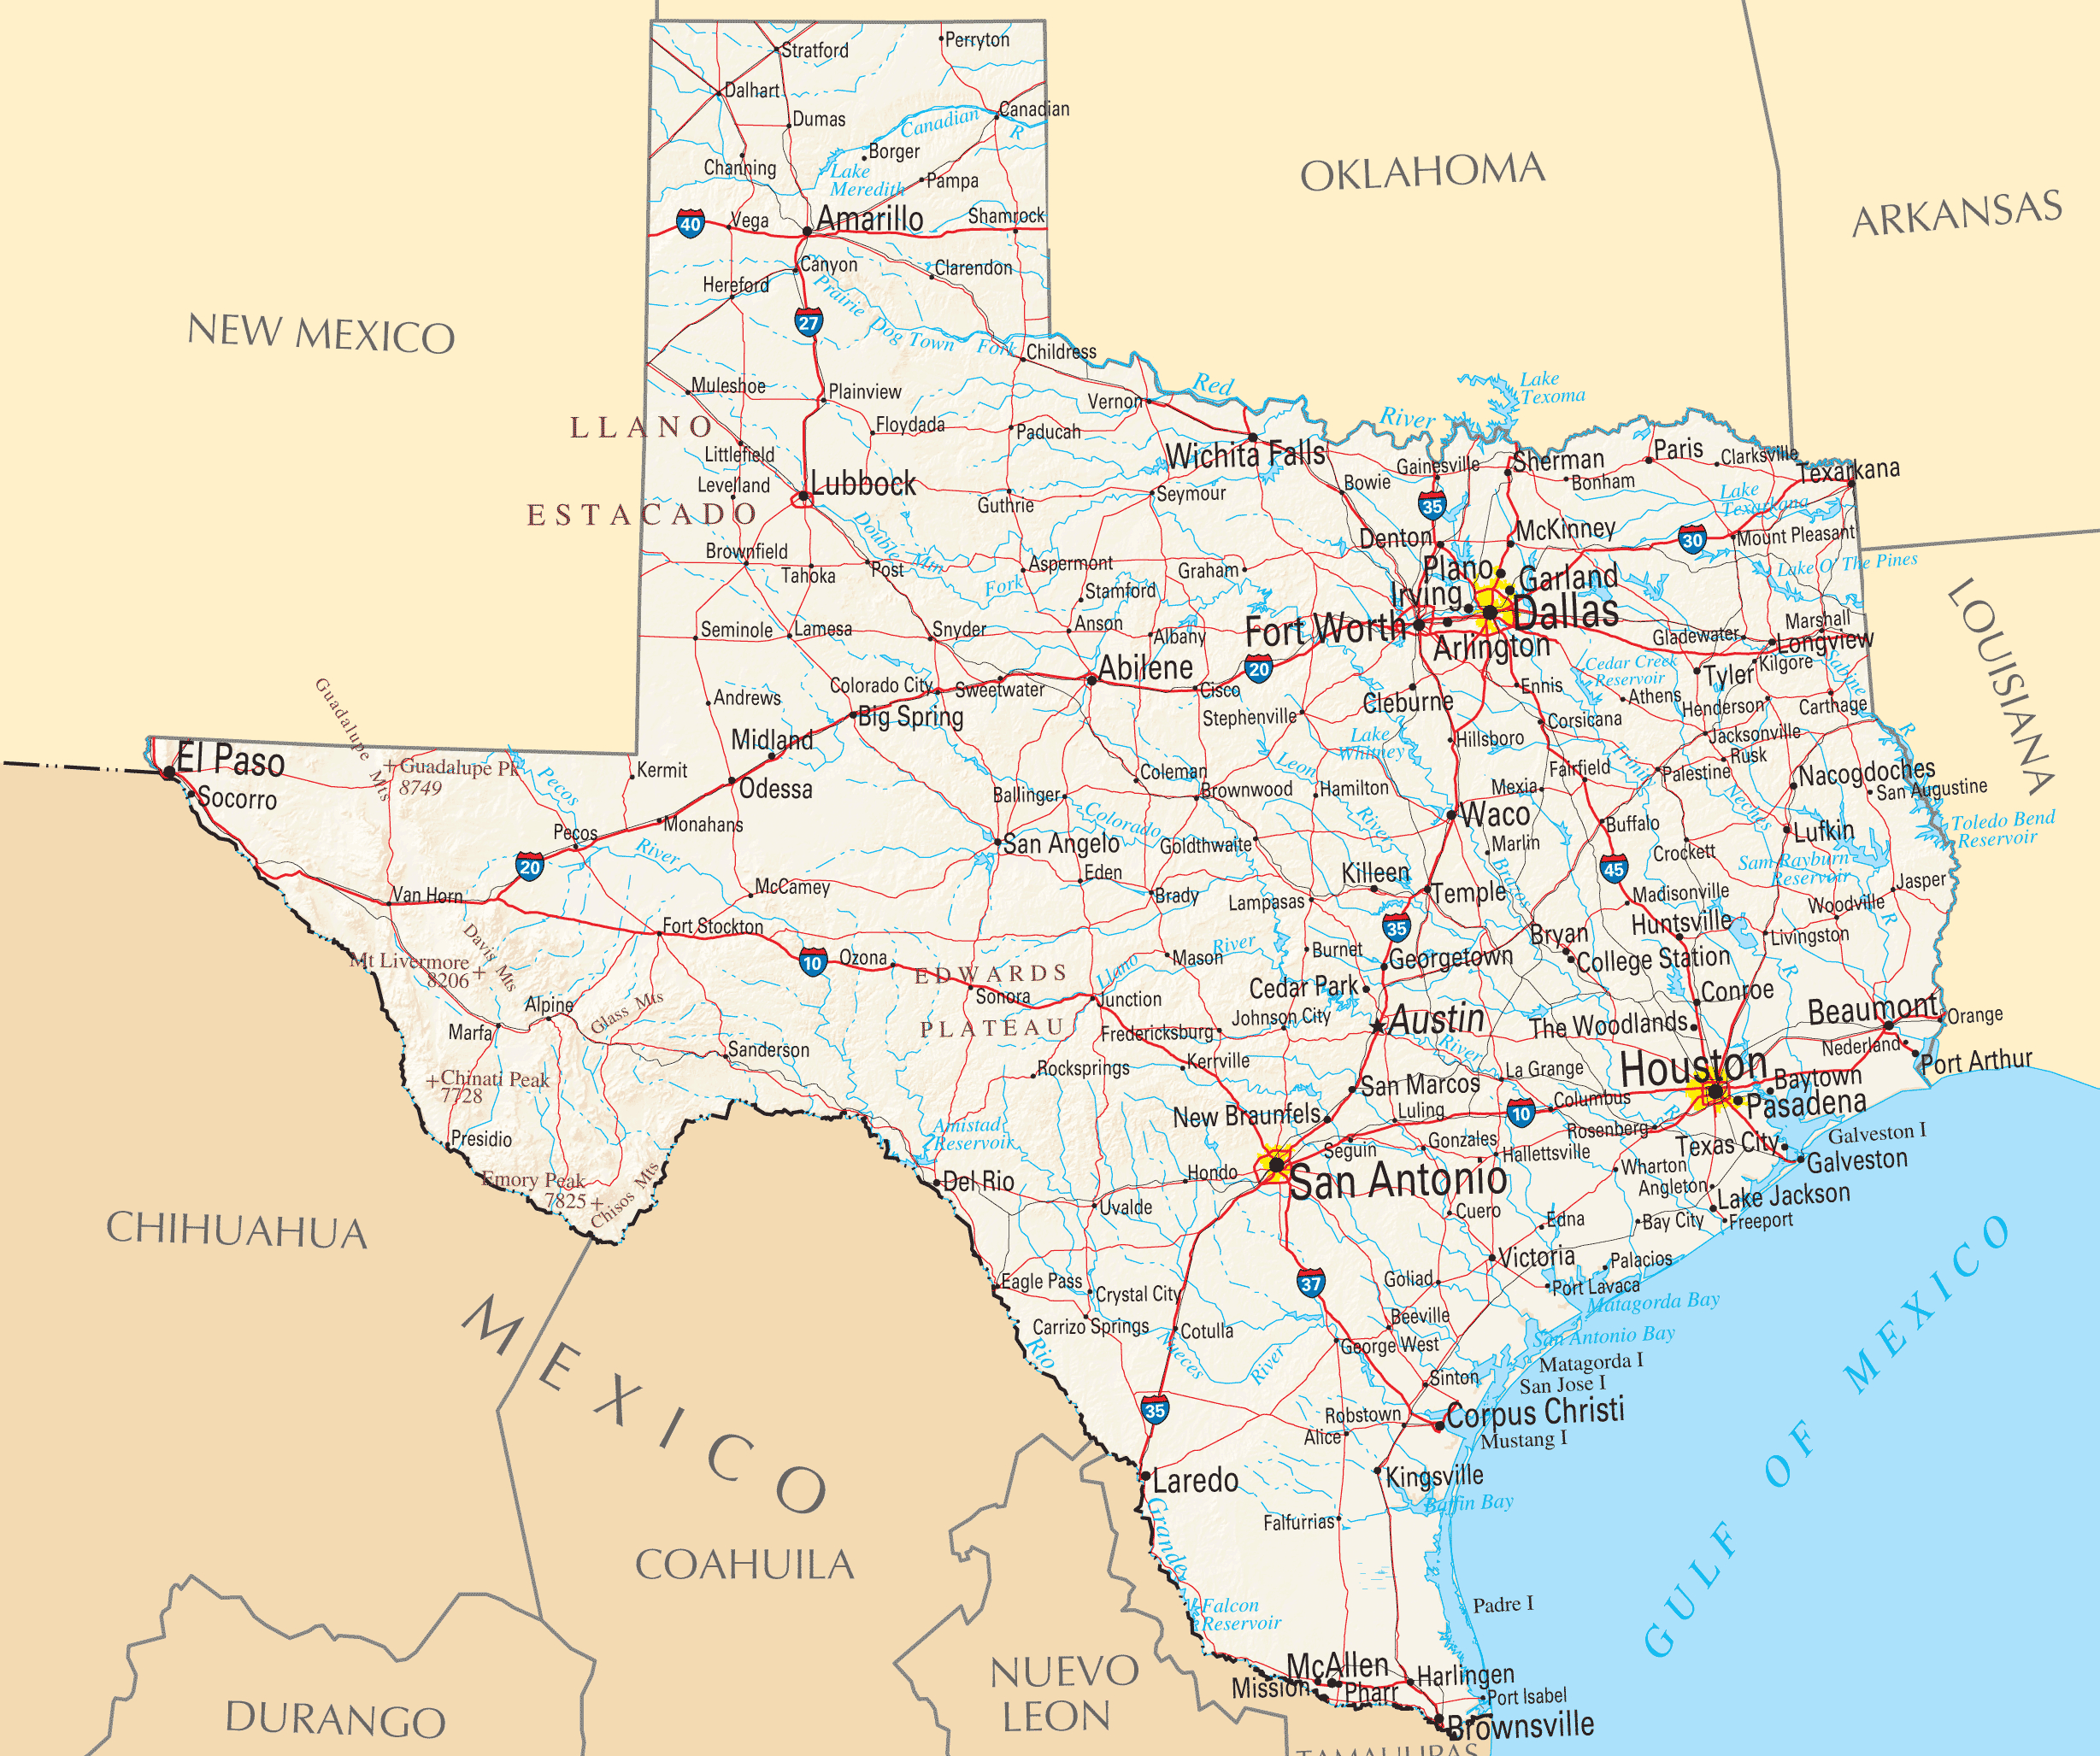 Maps For Texas And Travel Information | Download Free Maps For Texas - Free Texas Map